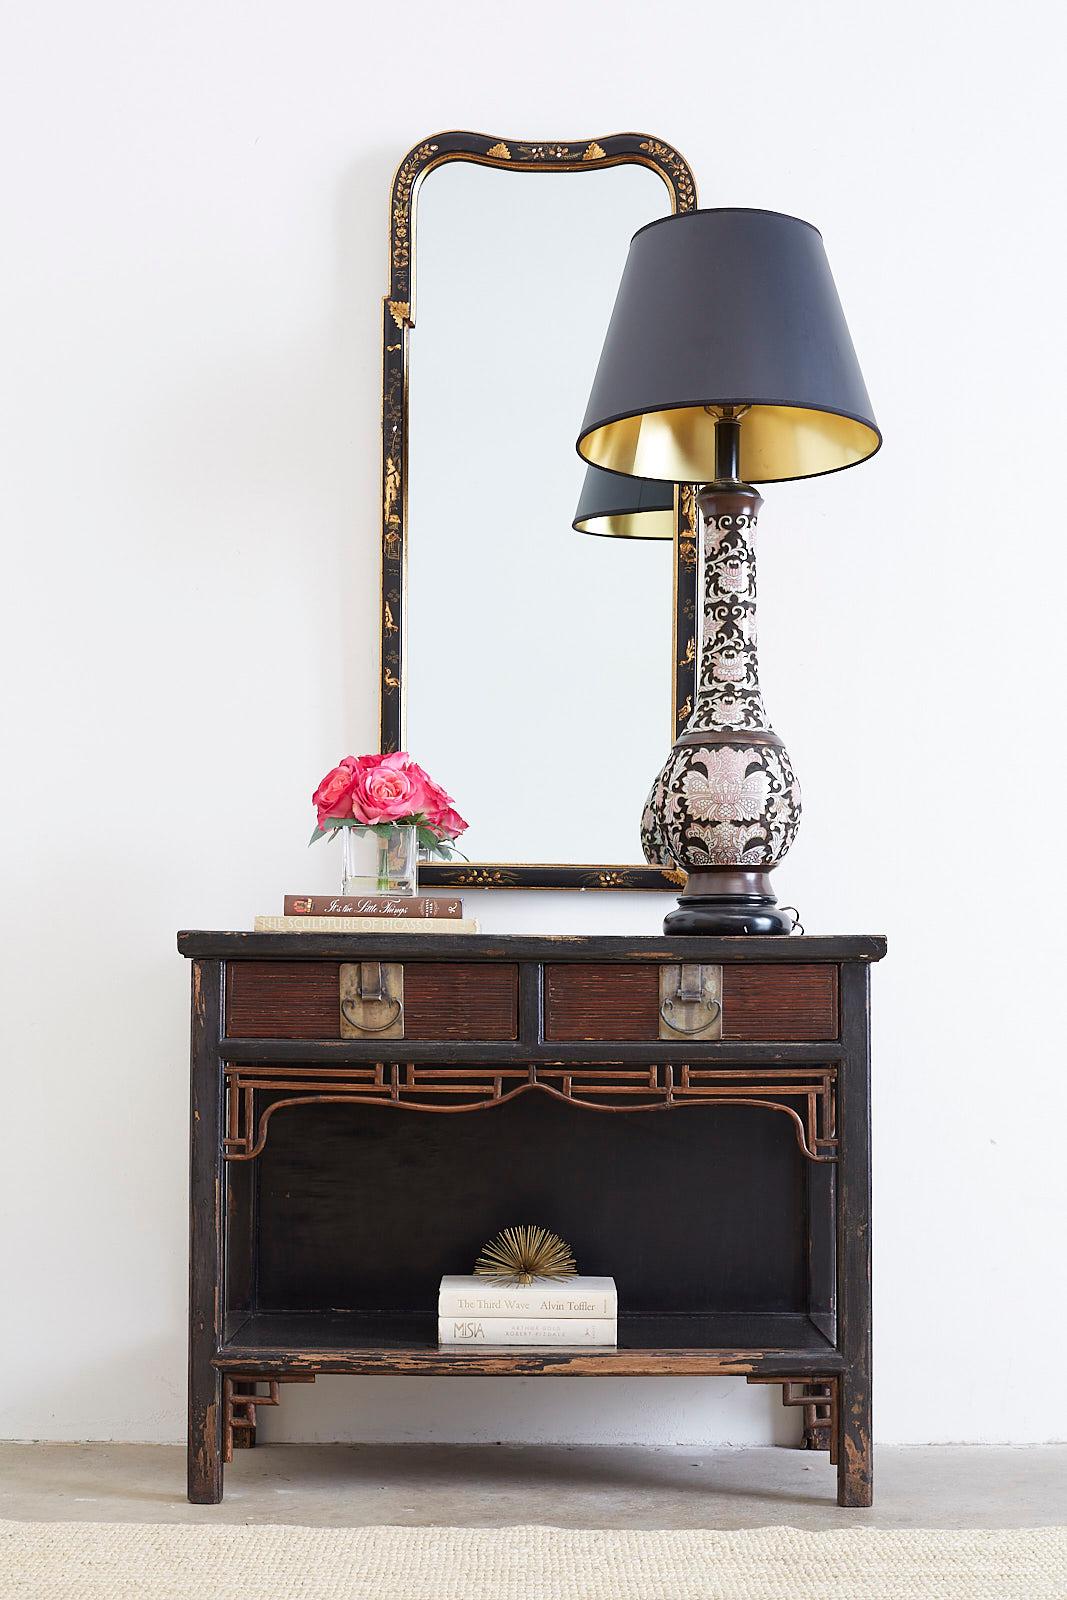 Rustic Chinese export lacquered elm console table featuring an ebonized finish. The table is fronted by two large storage drawers with brass metal pulls. The two tier design is decorated with an open fretwork design of bamboo and rattan. The table